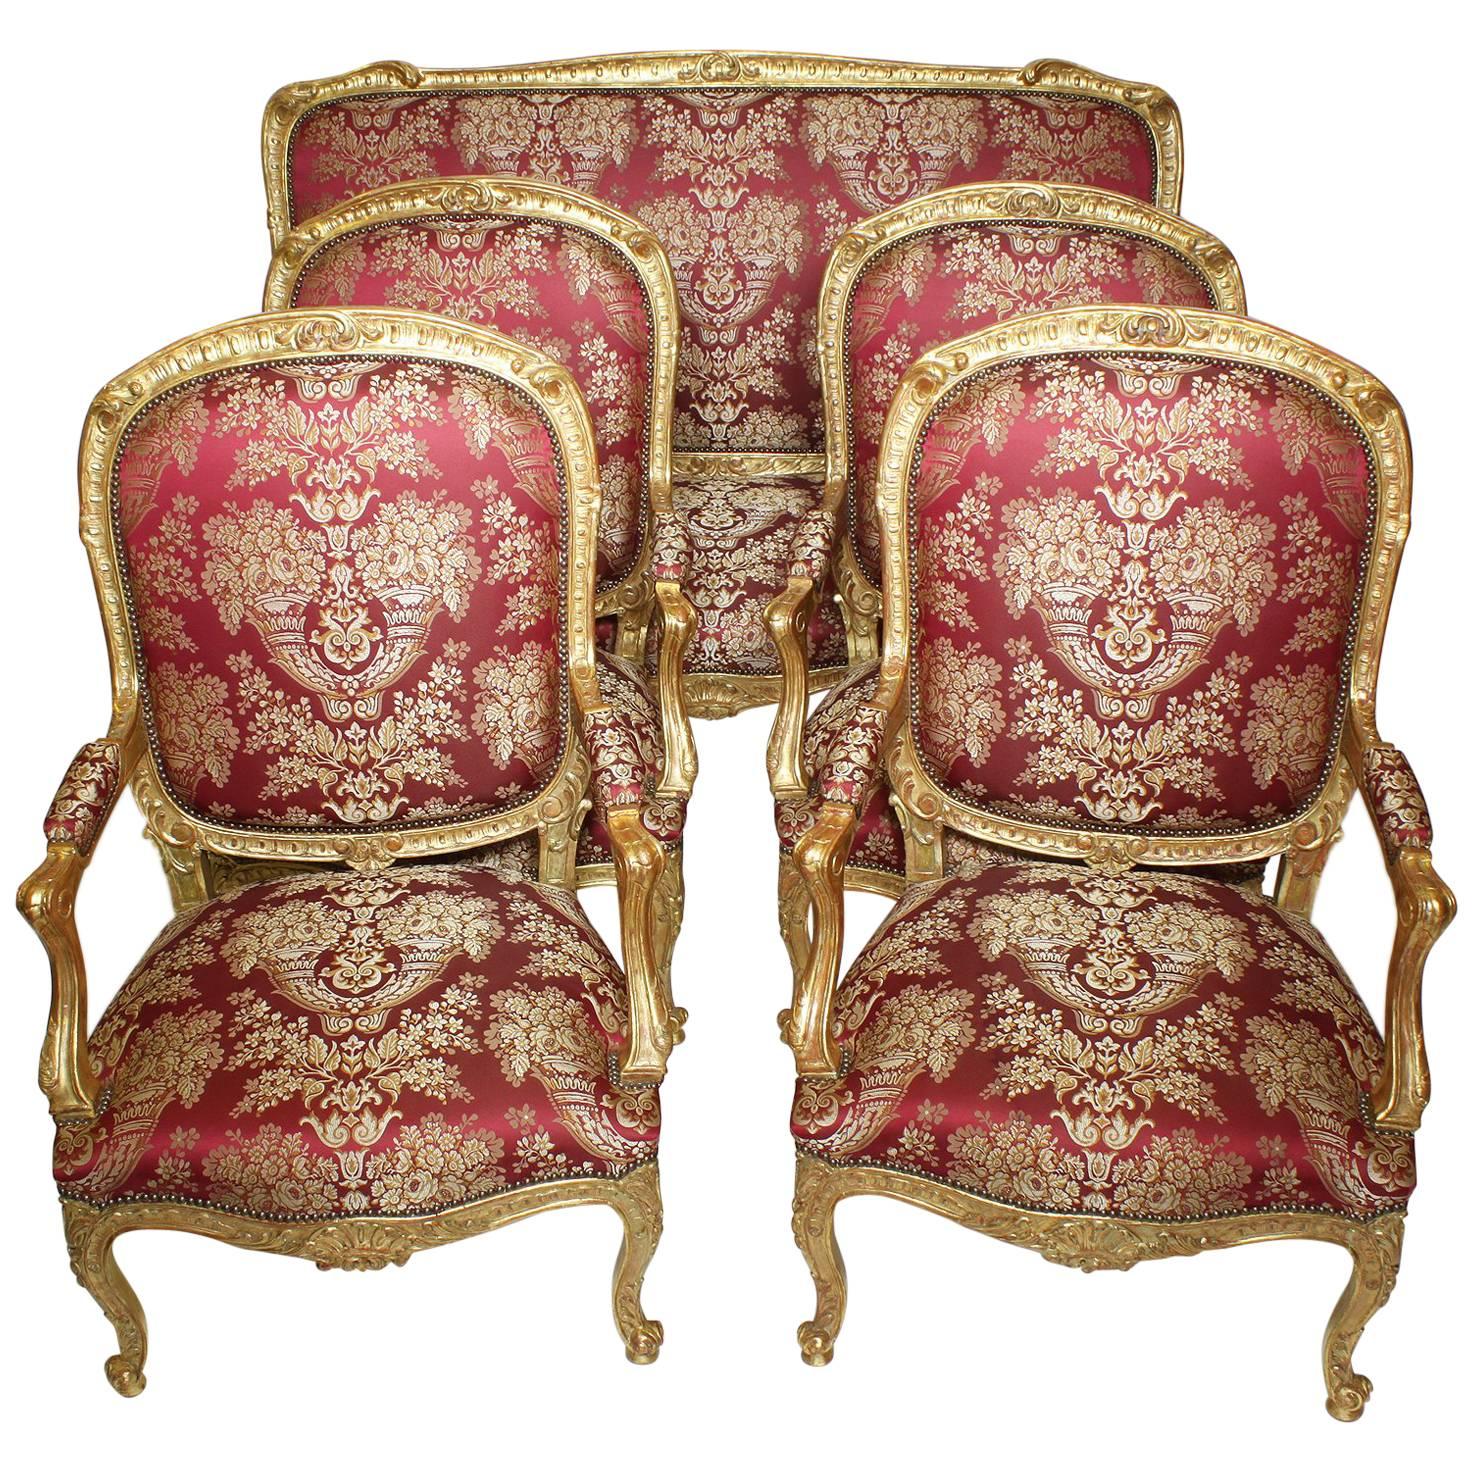 Palatial 19th Century Louis XV Style Giltwood Carved Five-Piece Salon Suite For Sale